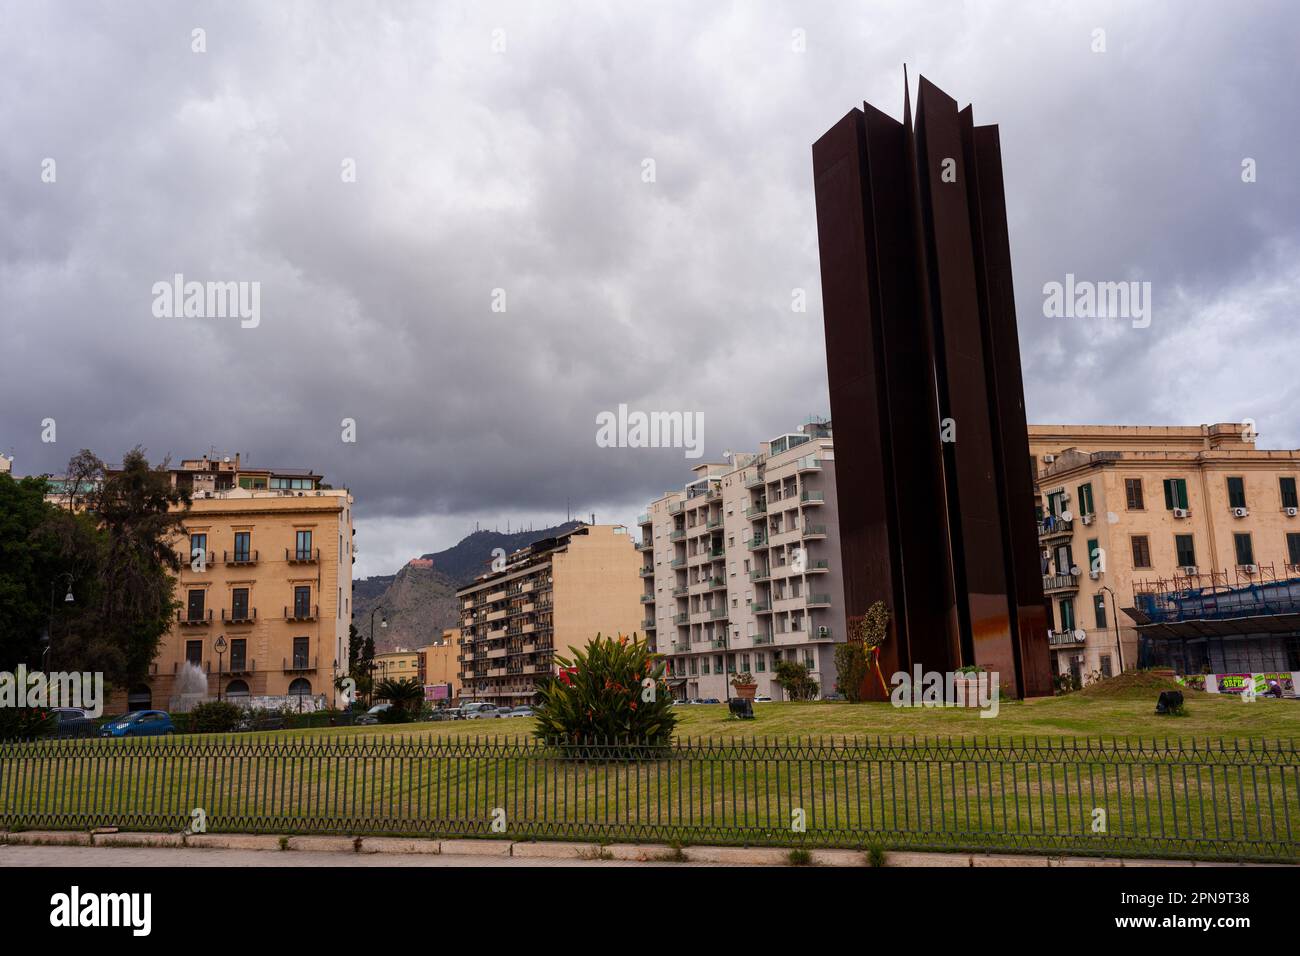 Palermo, Italy - December 23, 2022: Monument to the Fallen in the Fight against the Mafia, Palermo Stock Photo